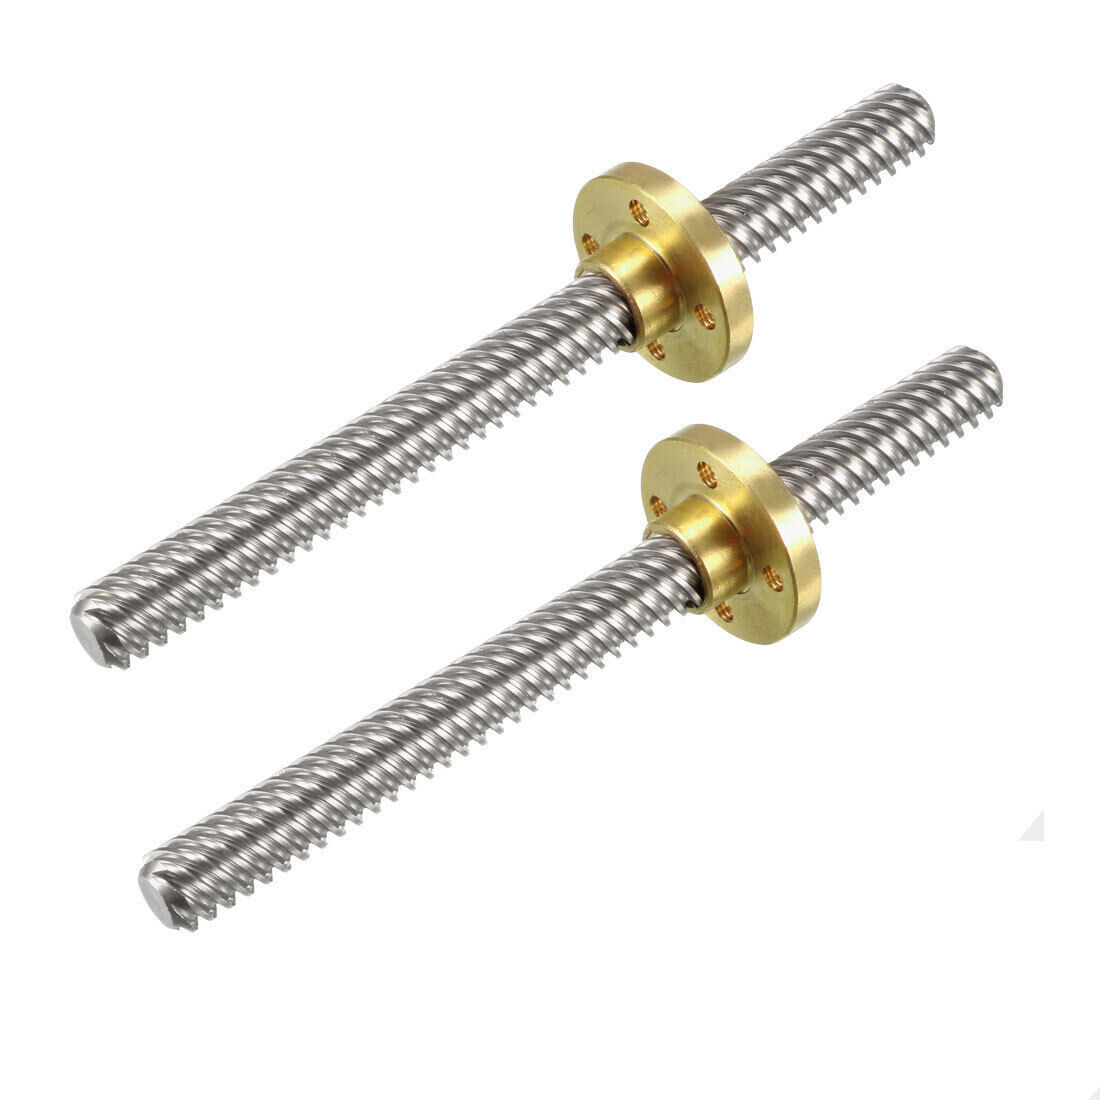 2pcs 100mm T8 Pitch 2mm Lead 12mm Lead Screw Rod with Copper Nut for 3D Printer